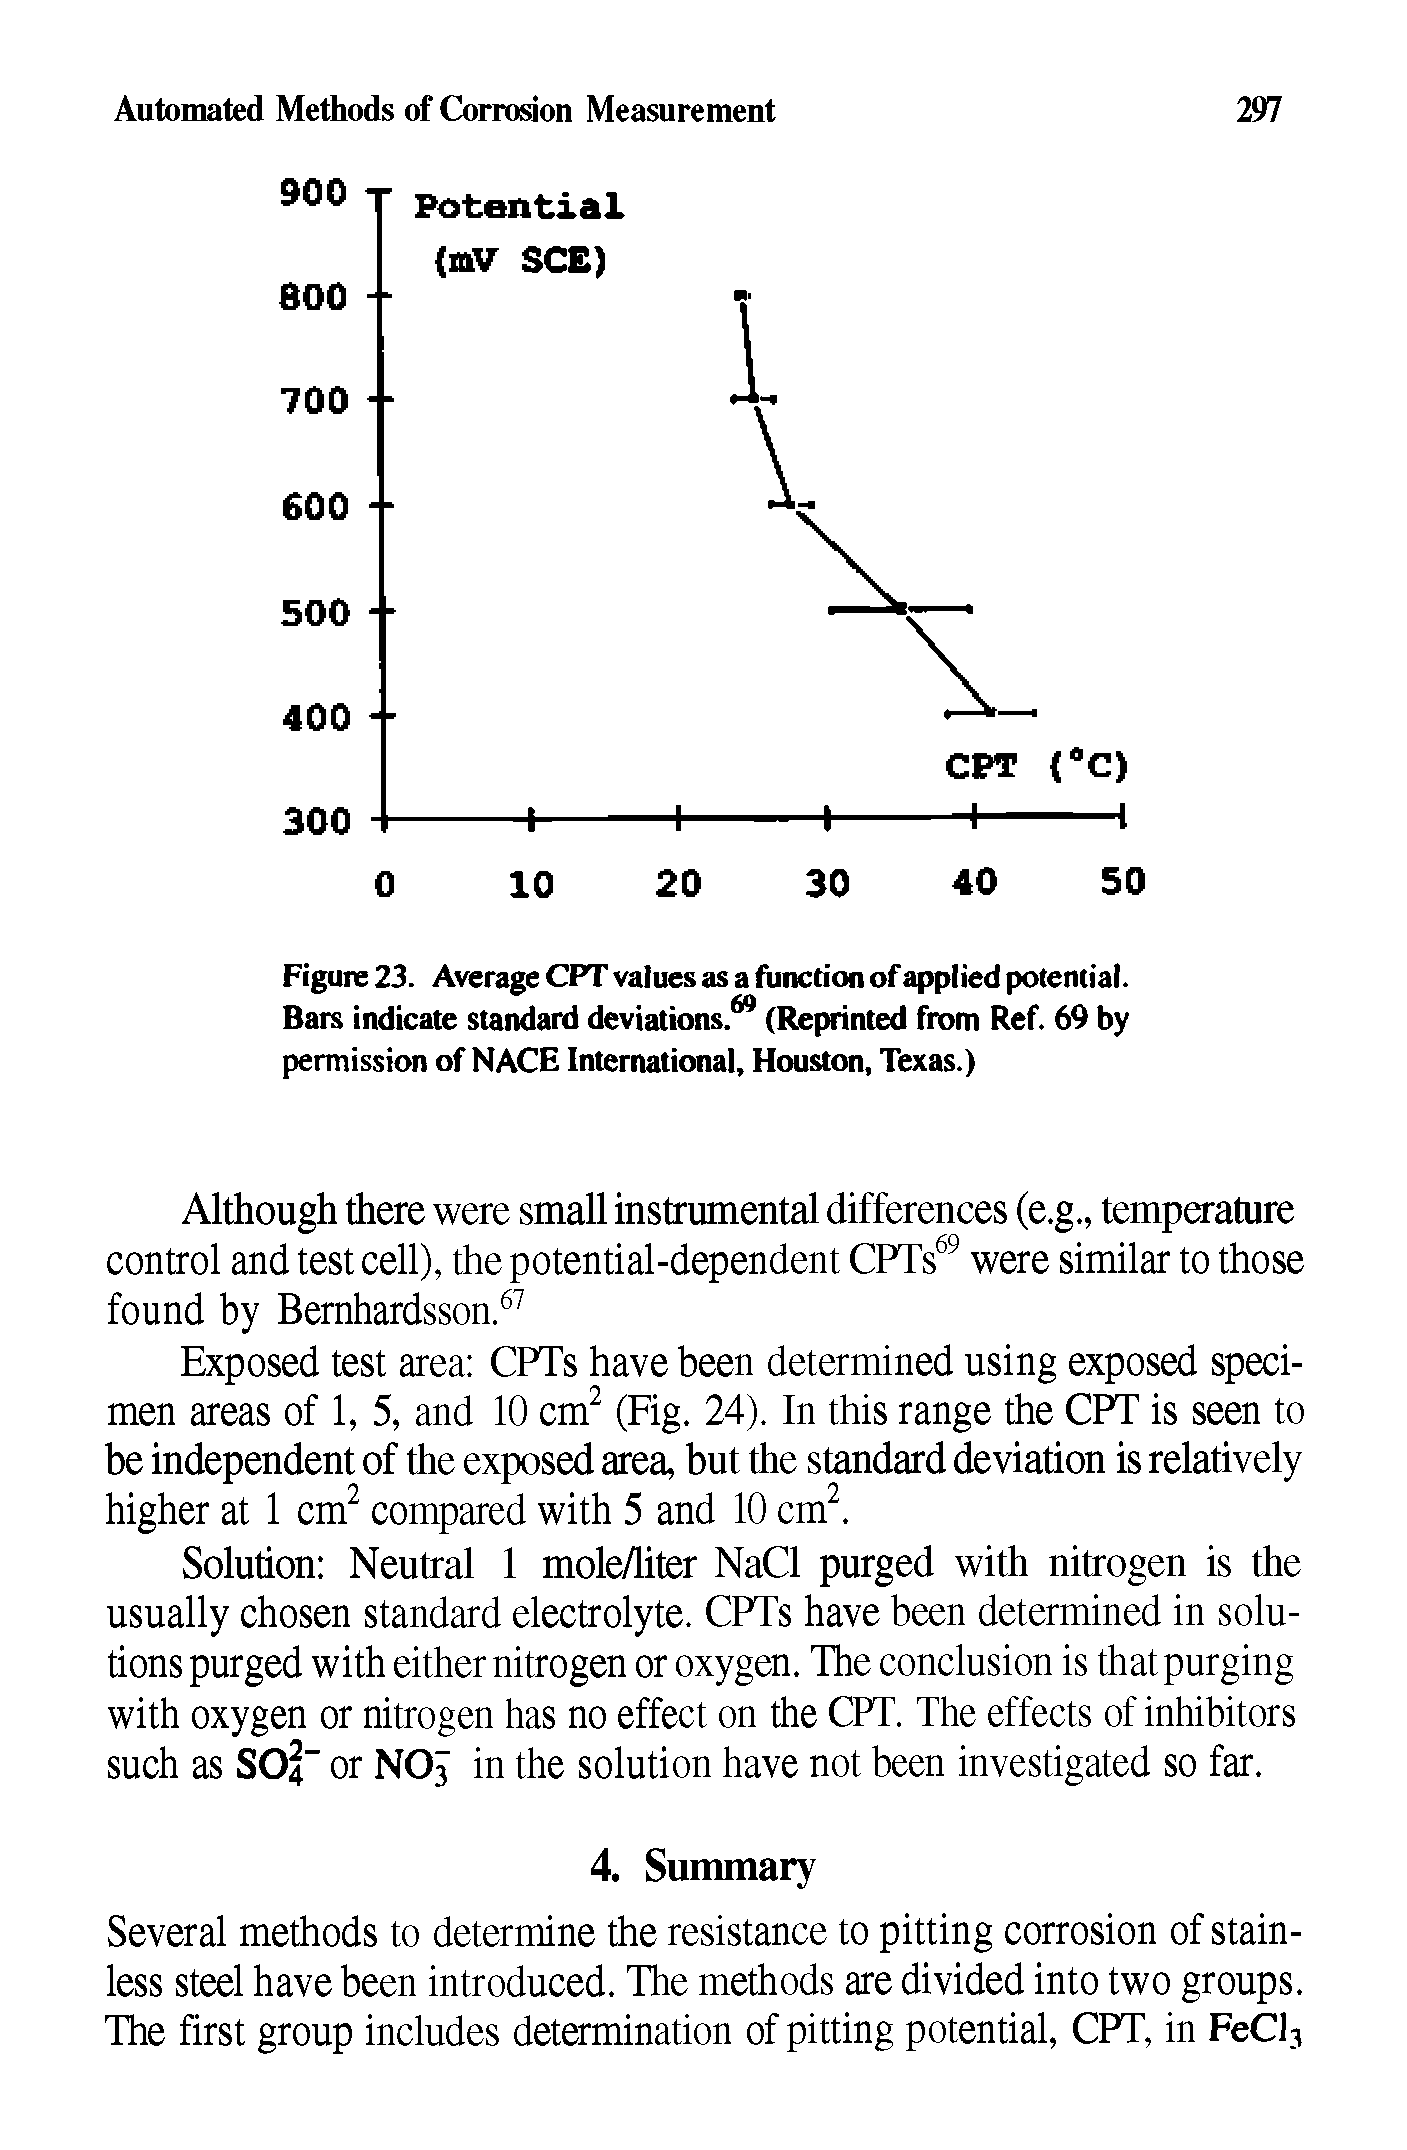 Figure 23. Average CPT values as a function of applied potential. Bars indicate standard deviations. (Reprinted from Ref. 69 by permission of NACE International, Houston, Texas.)...